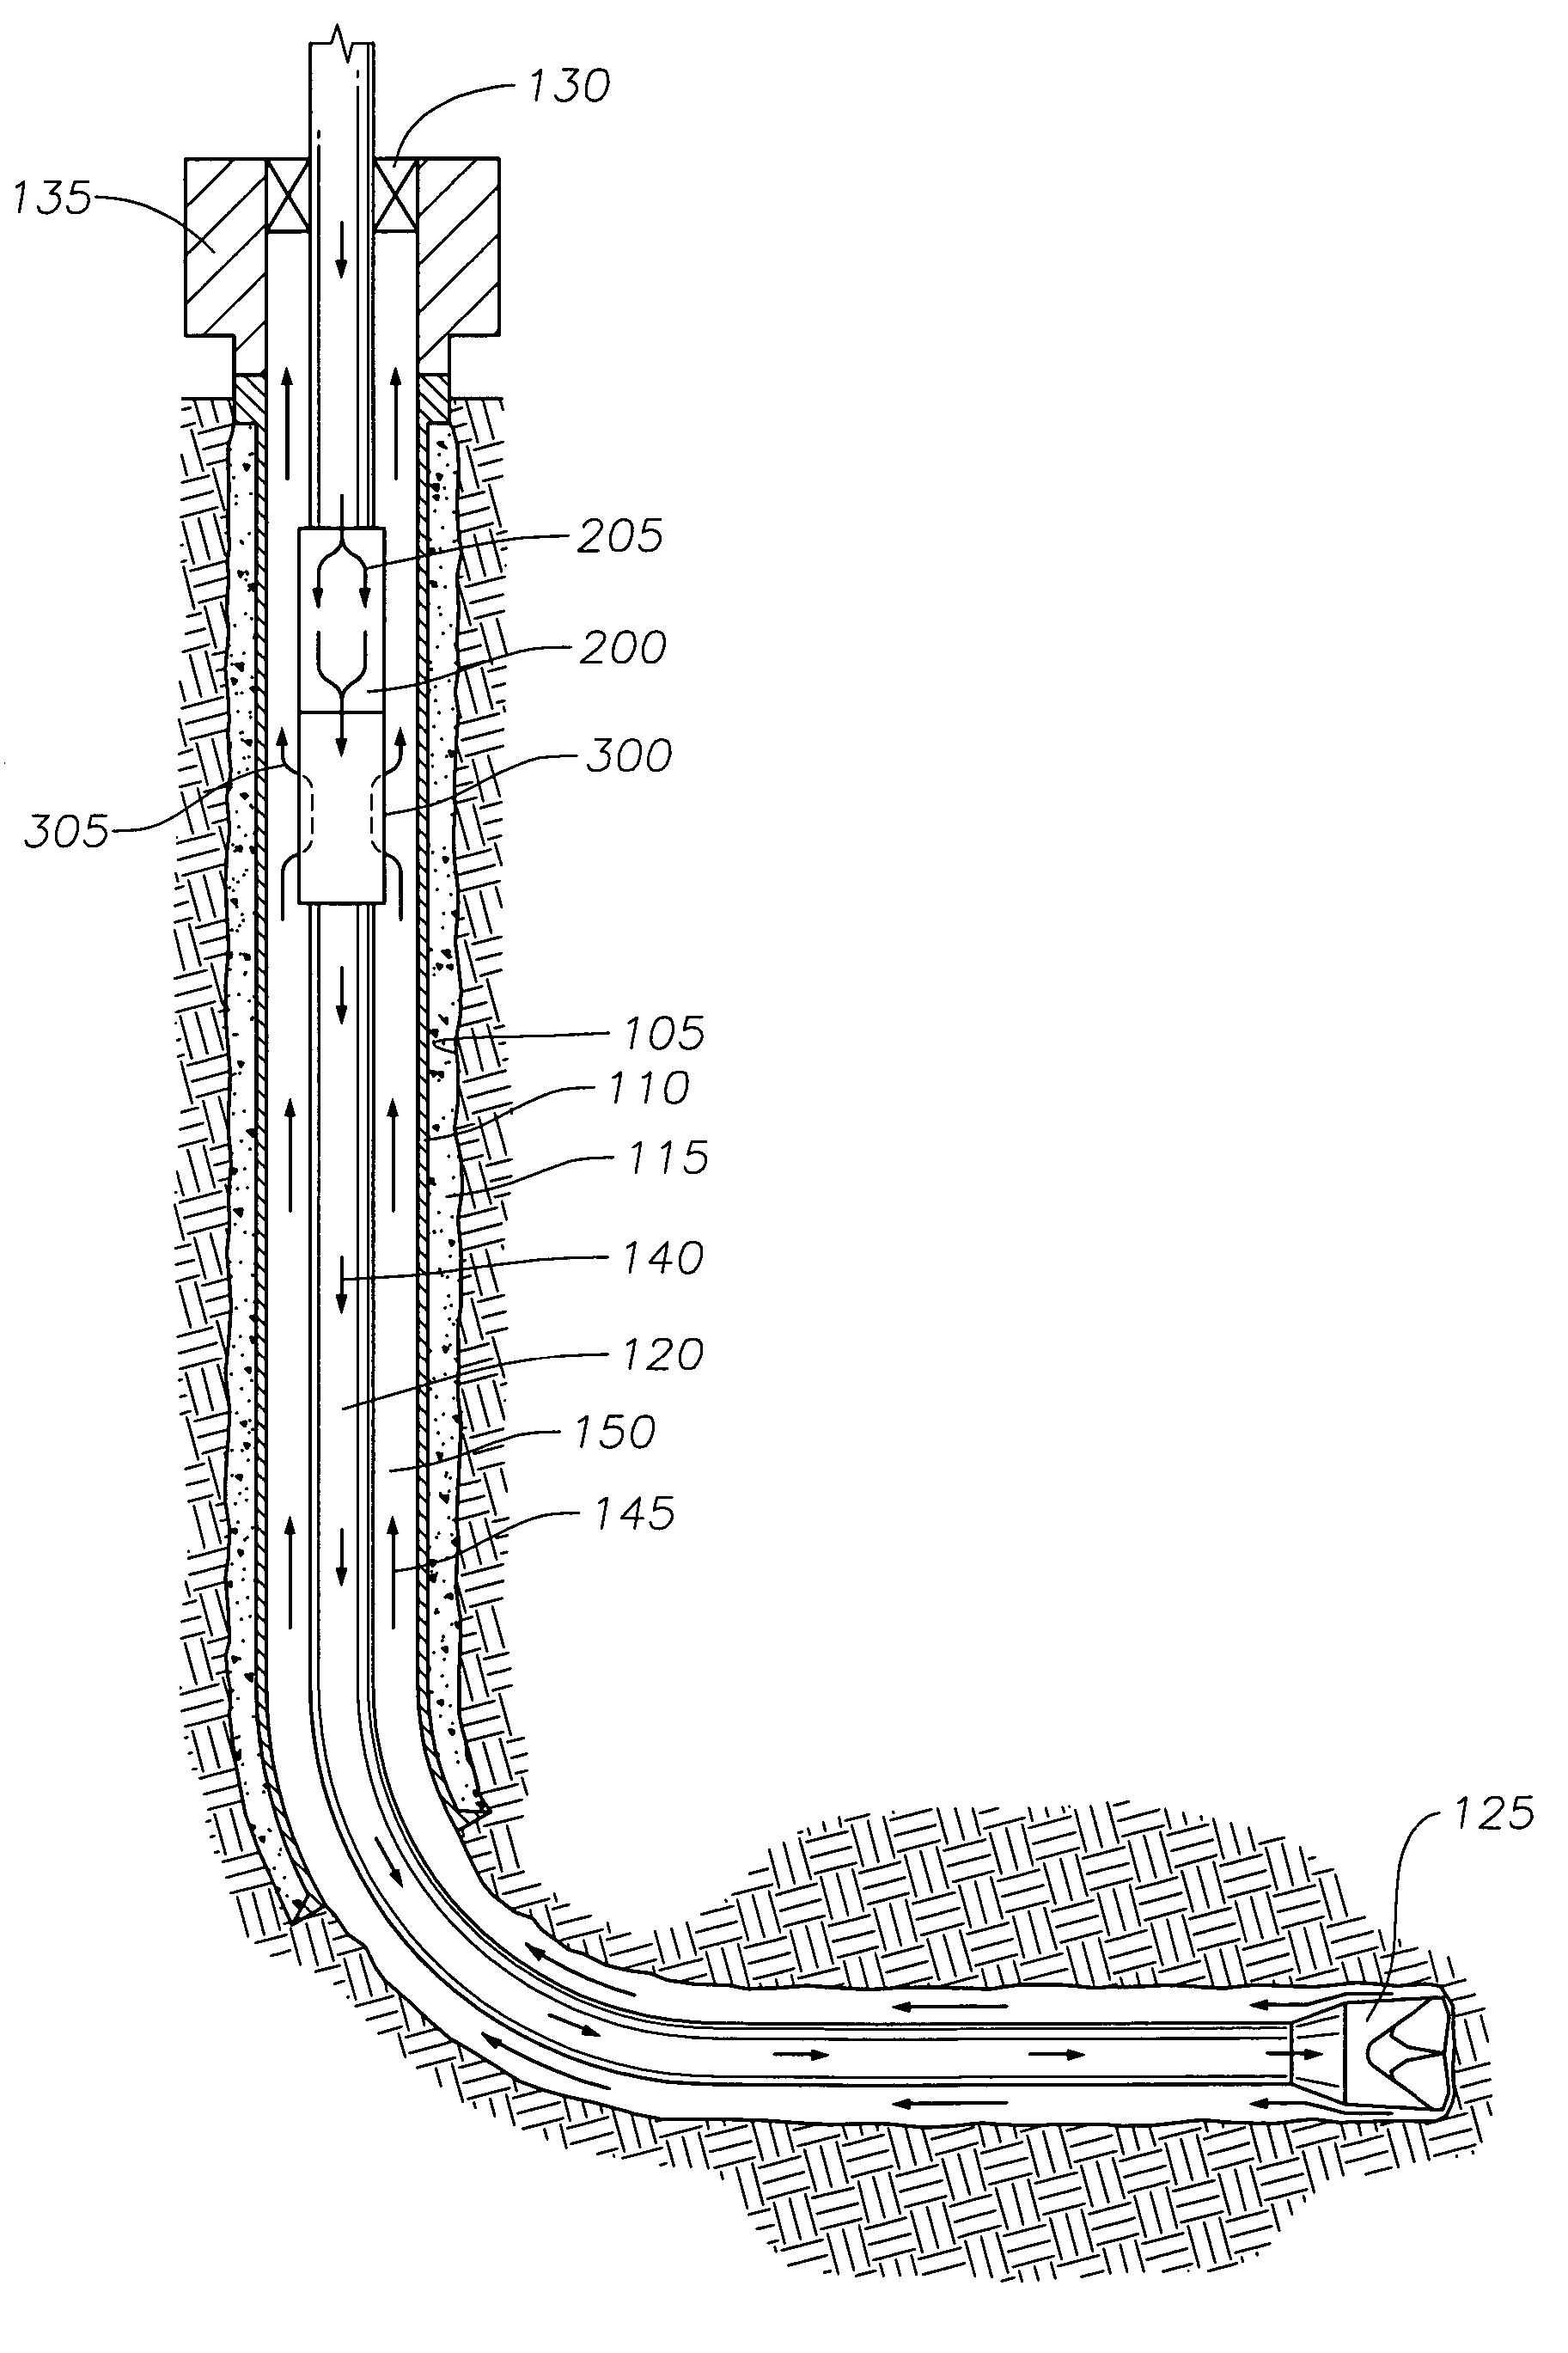 Method for completing a well using increased fluid temperature